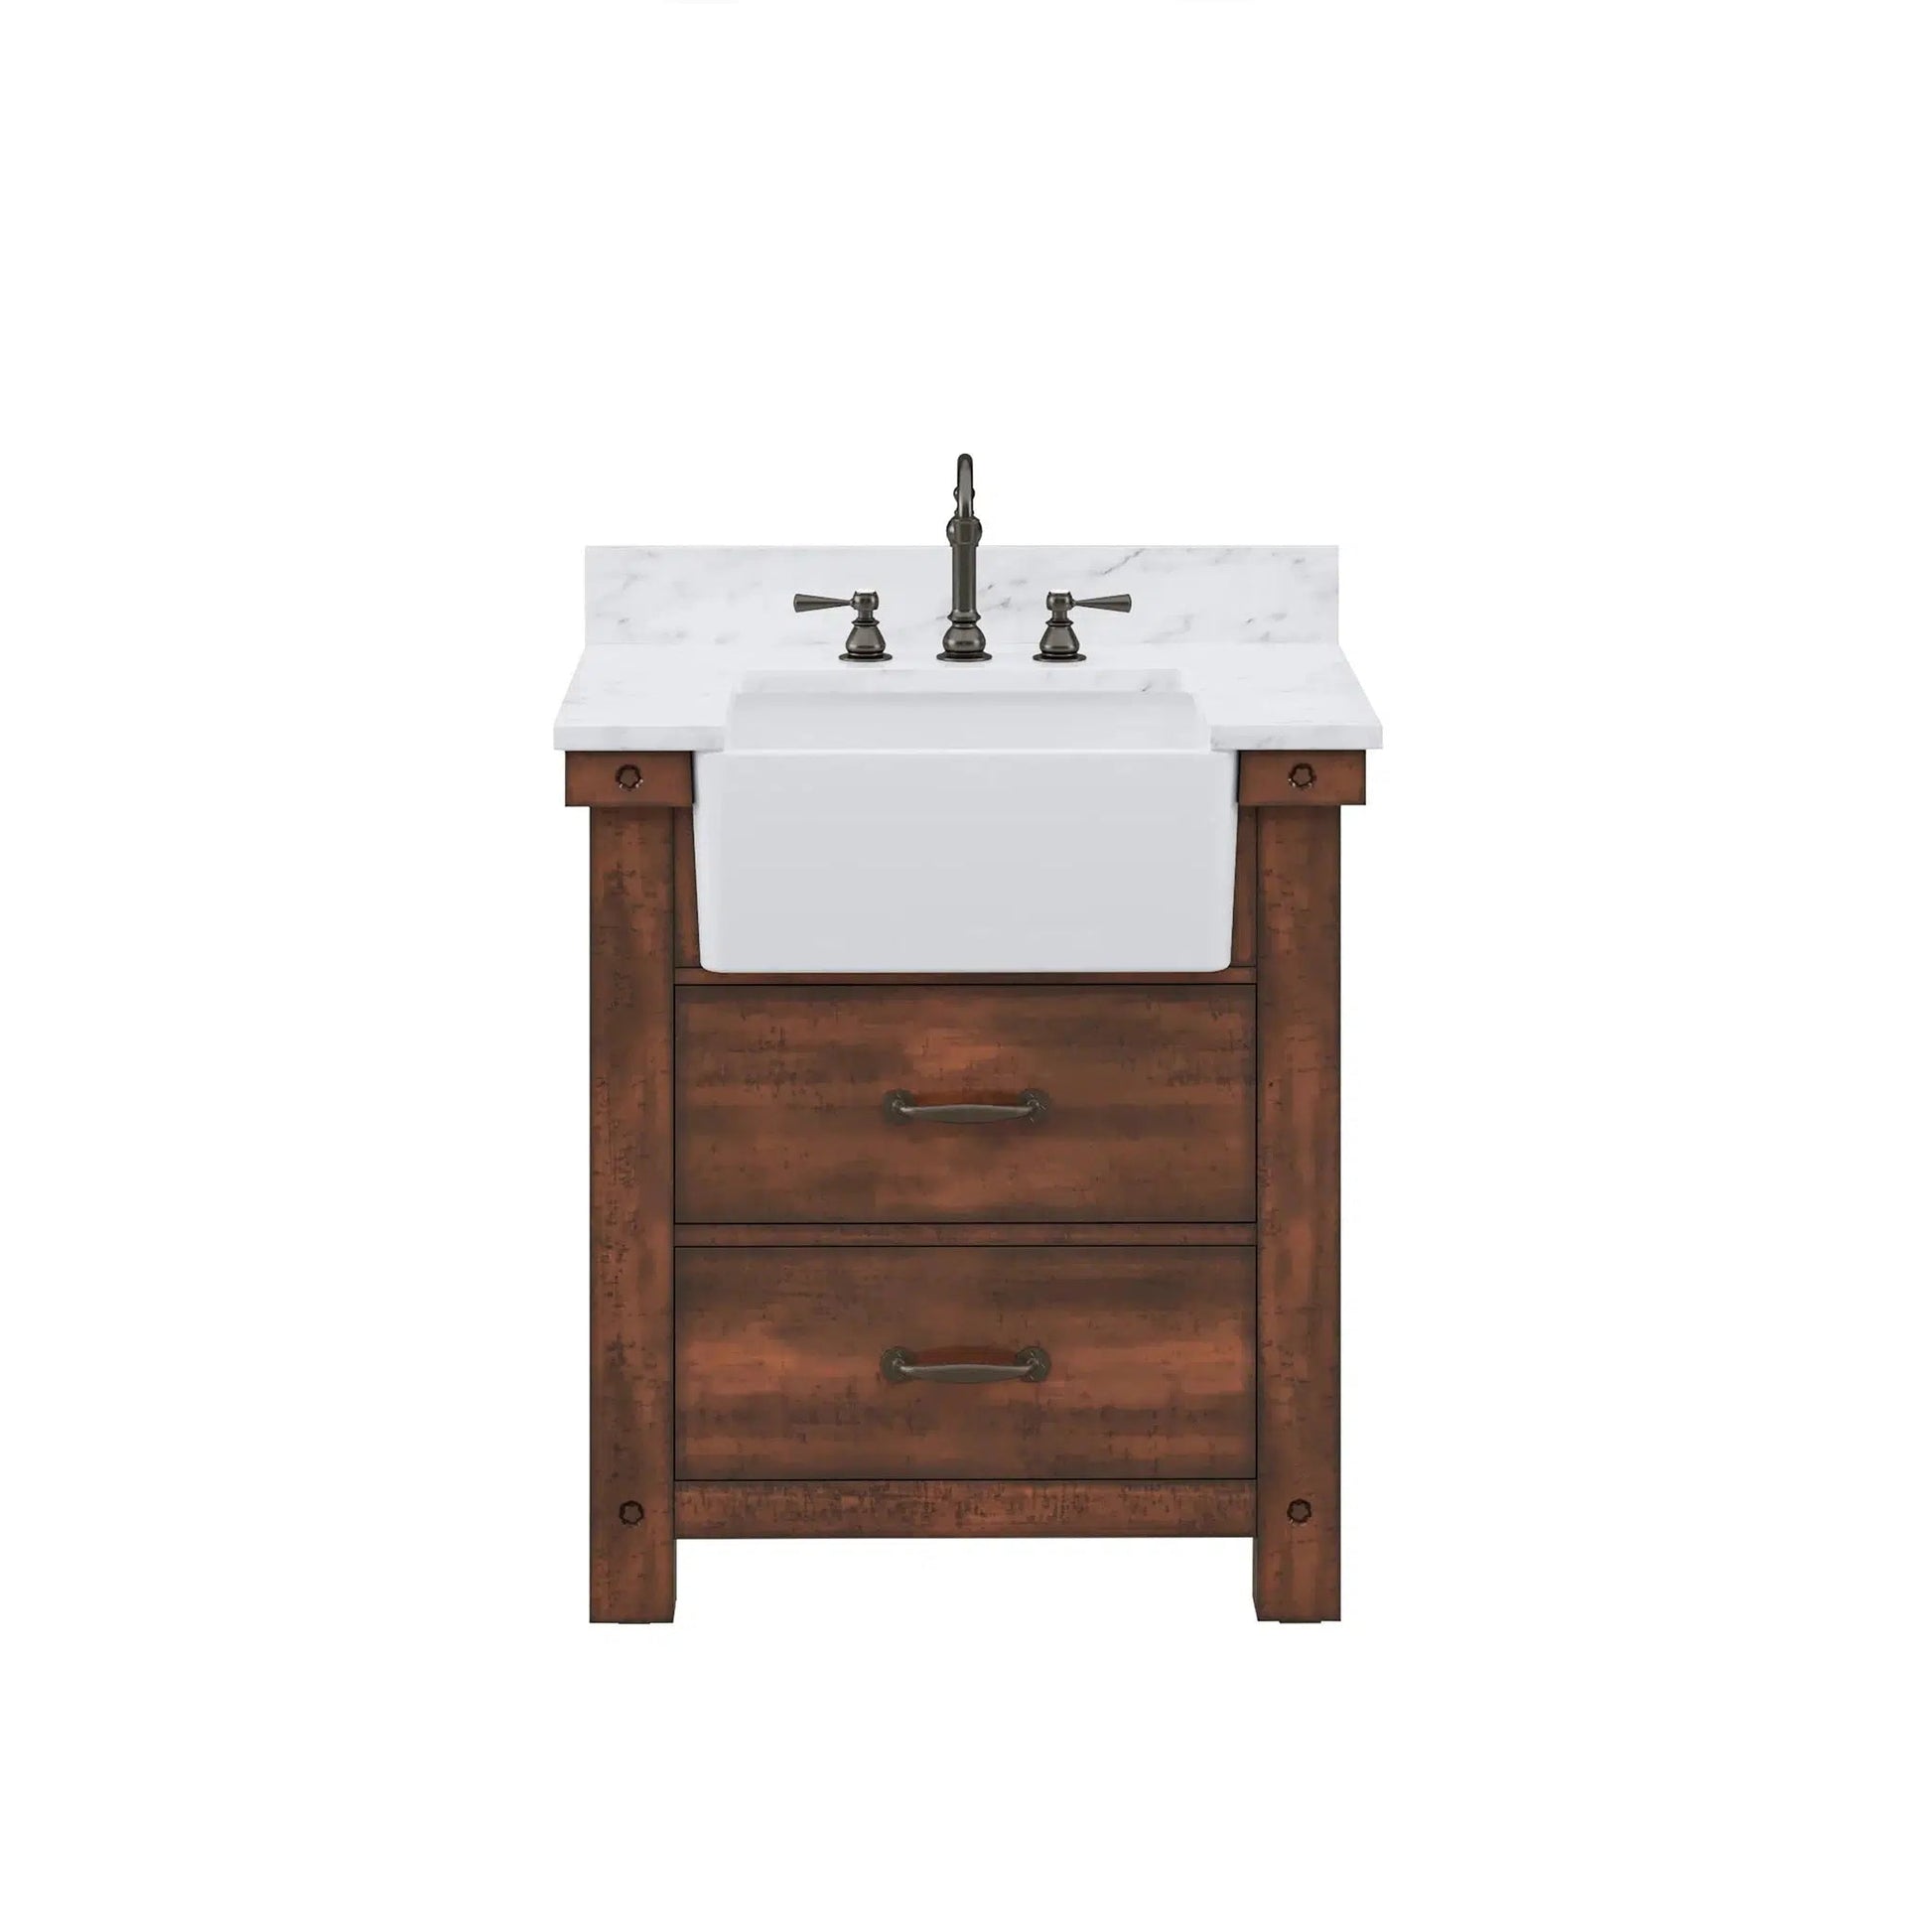 Water Creation Paisley 30" Single Sink Carrara White Marble Countertop Vanity in Rustic Sienna With Hook Faucet with 24" Rectangular Mirror